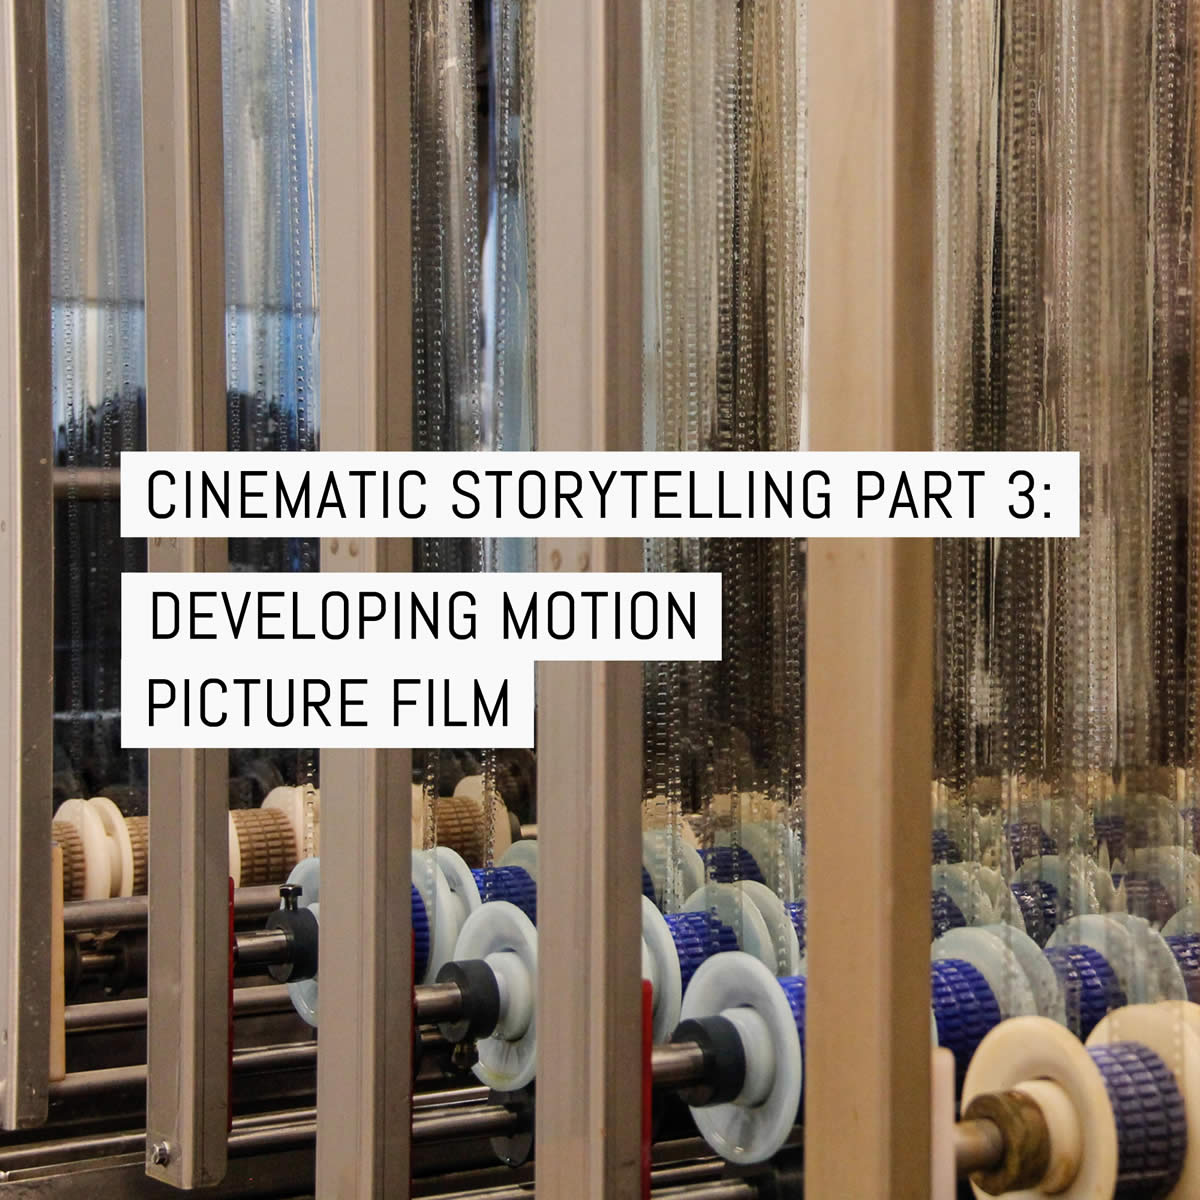 Cover - Cinematic storytelling part 3 - developing motion picture film v2